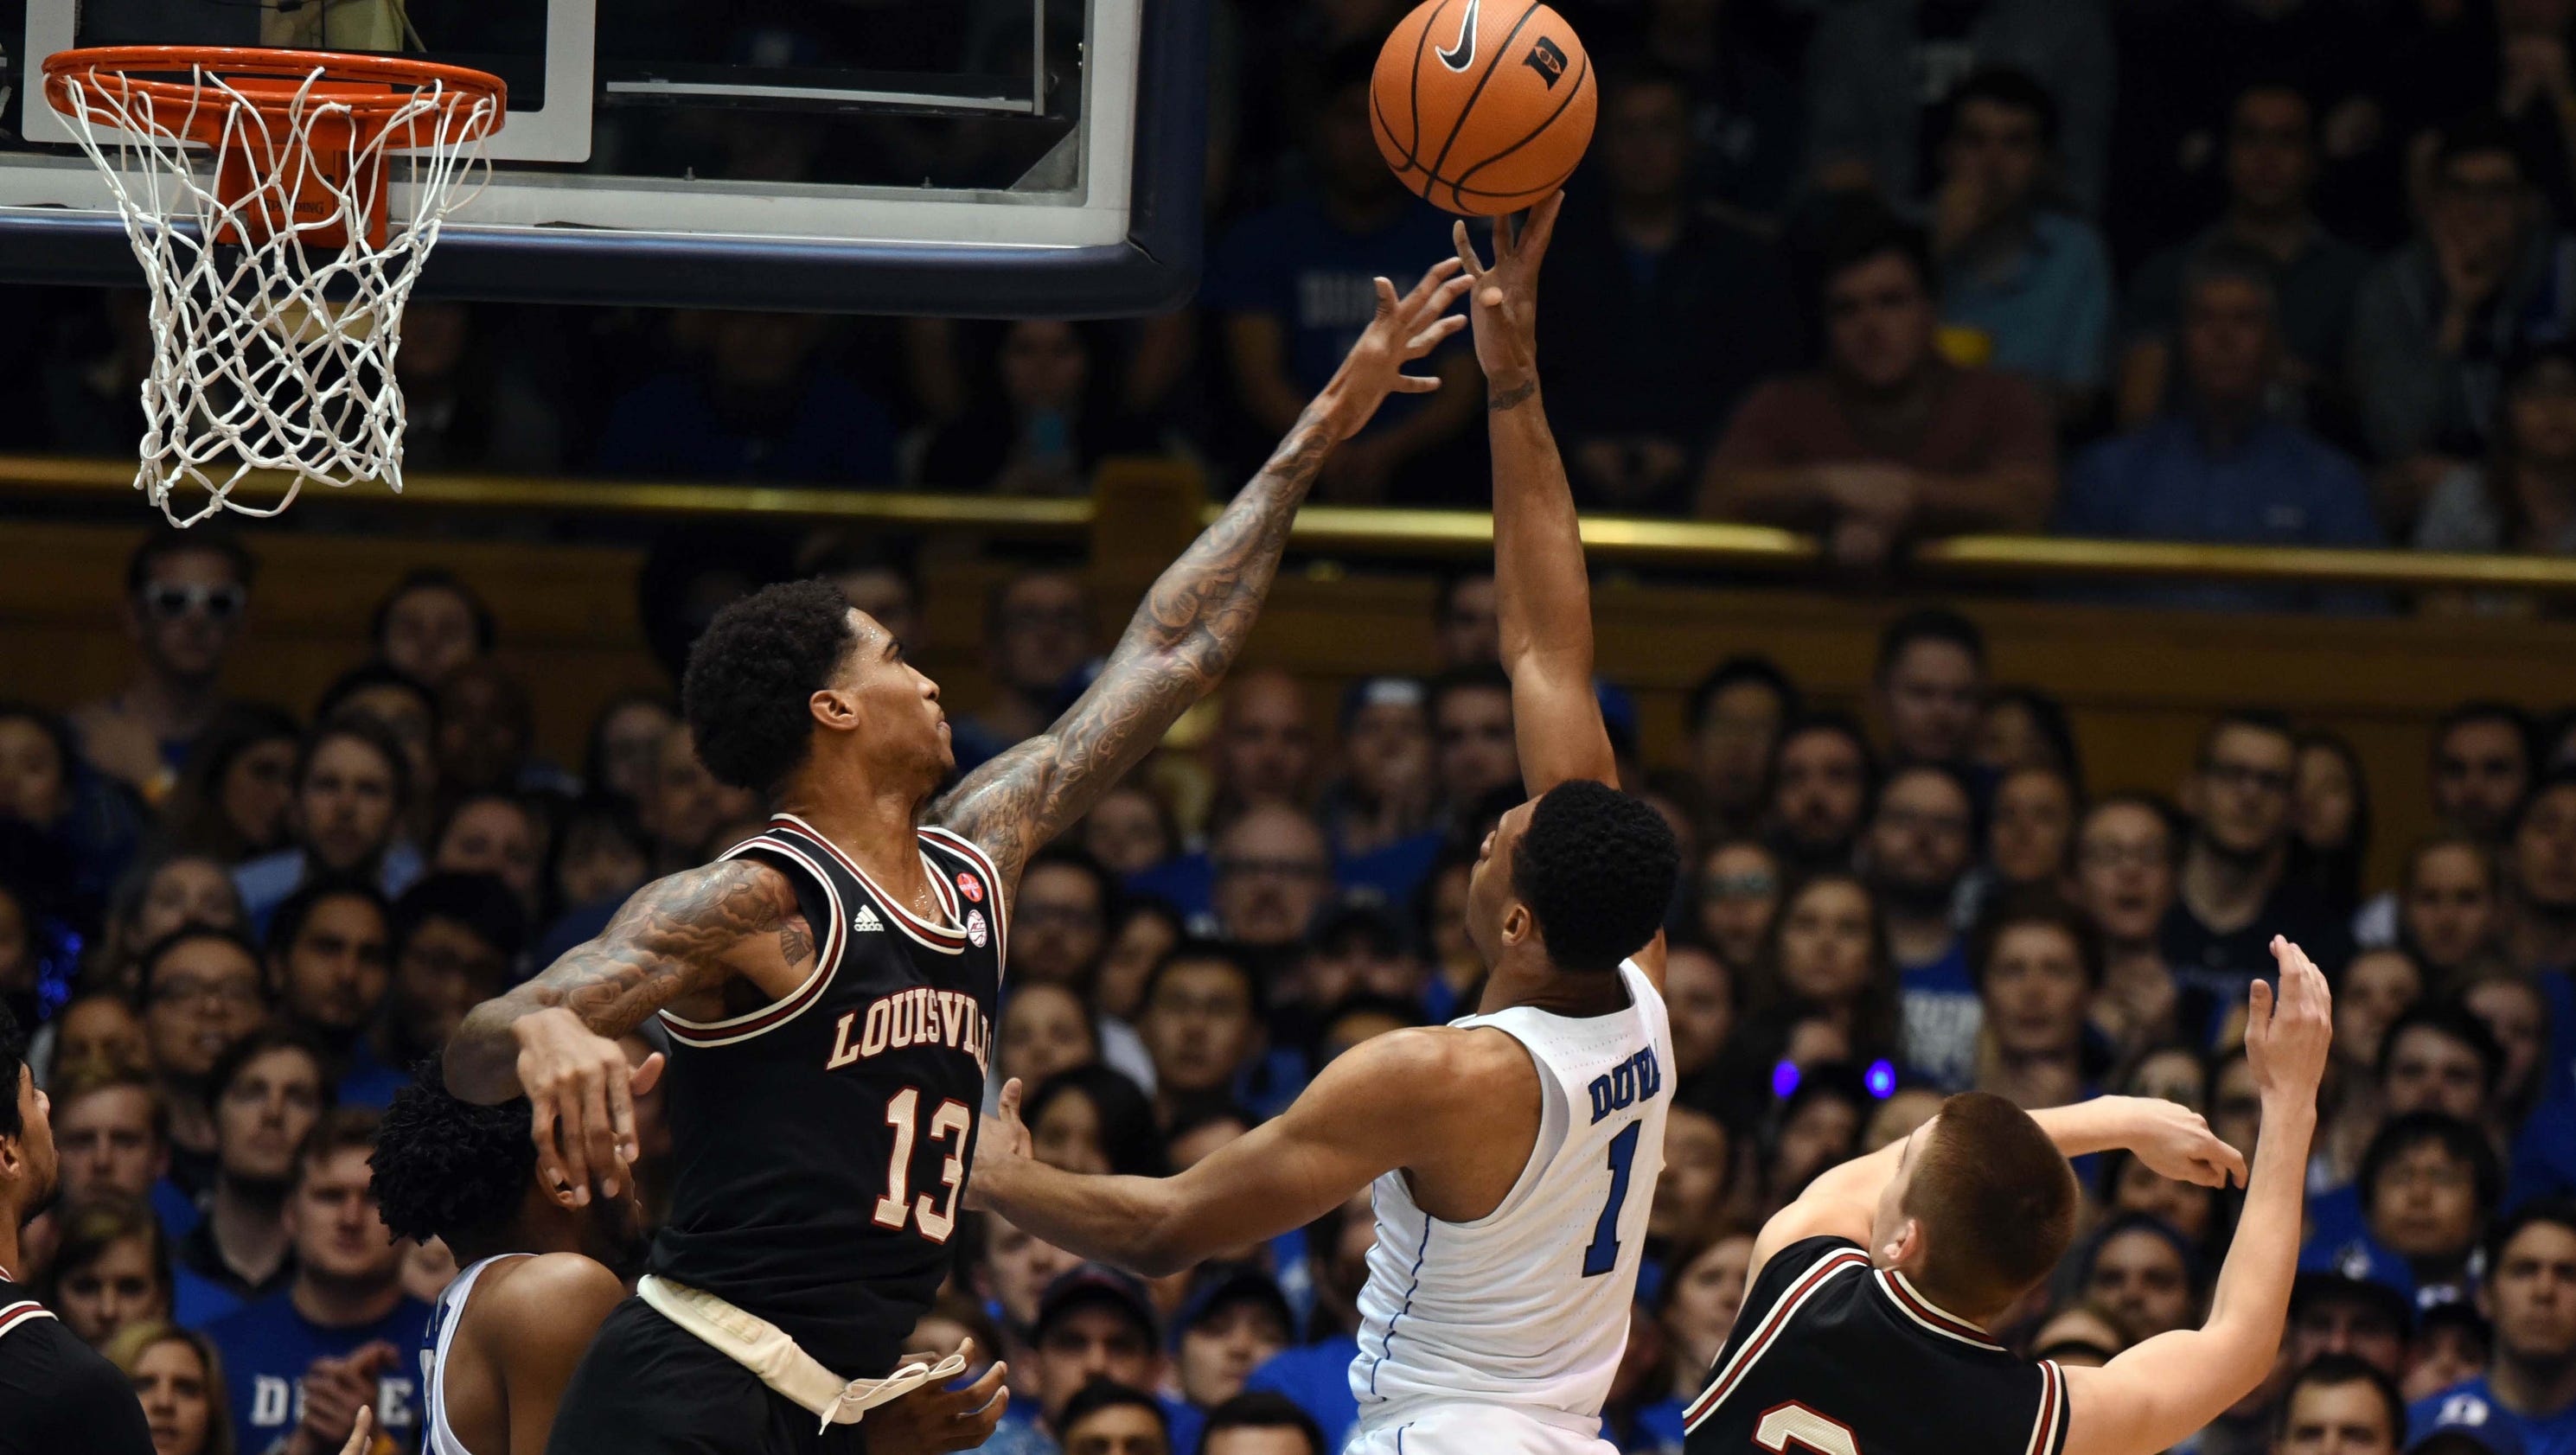 Louisville basketball routed at Duke, suffering fifth loss in seven games